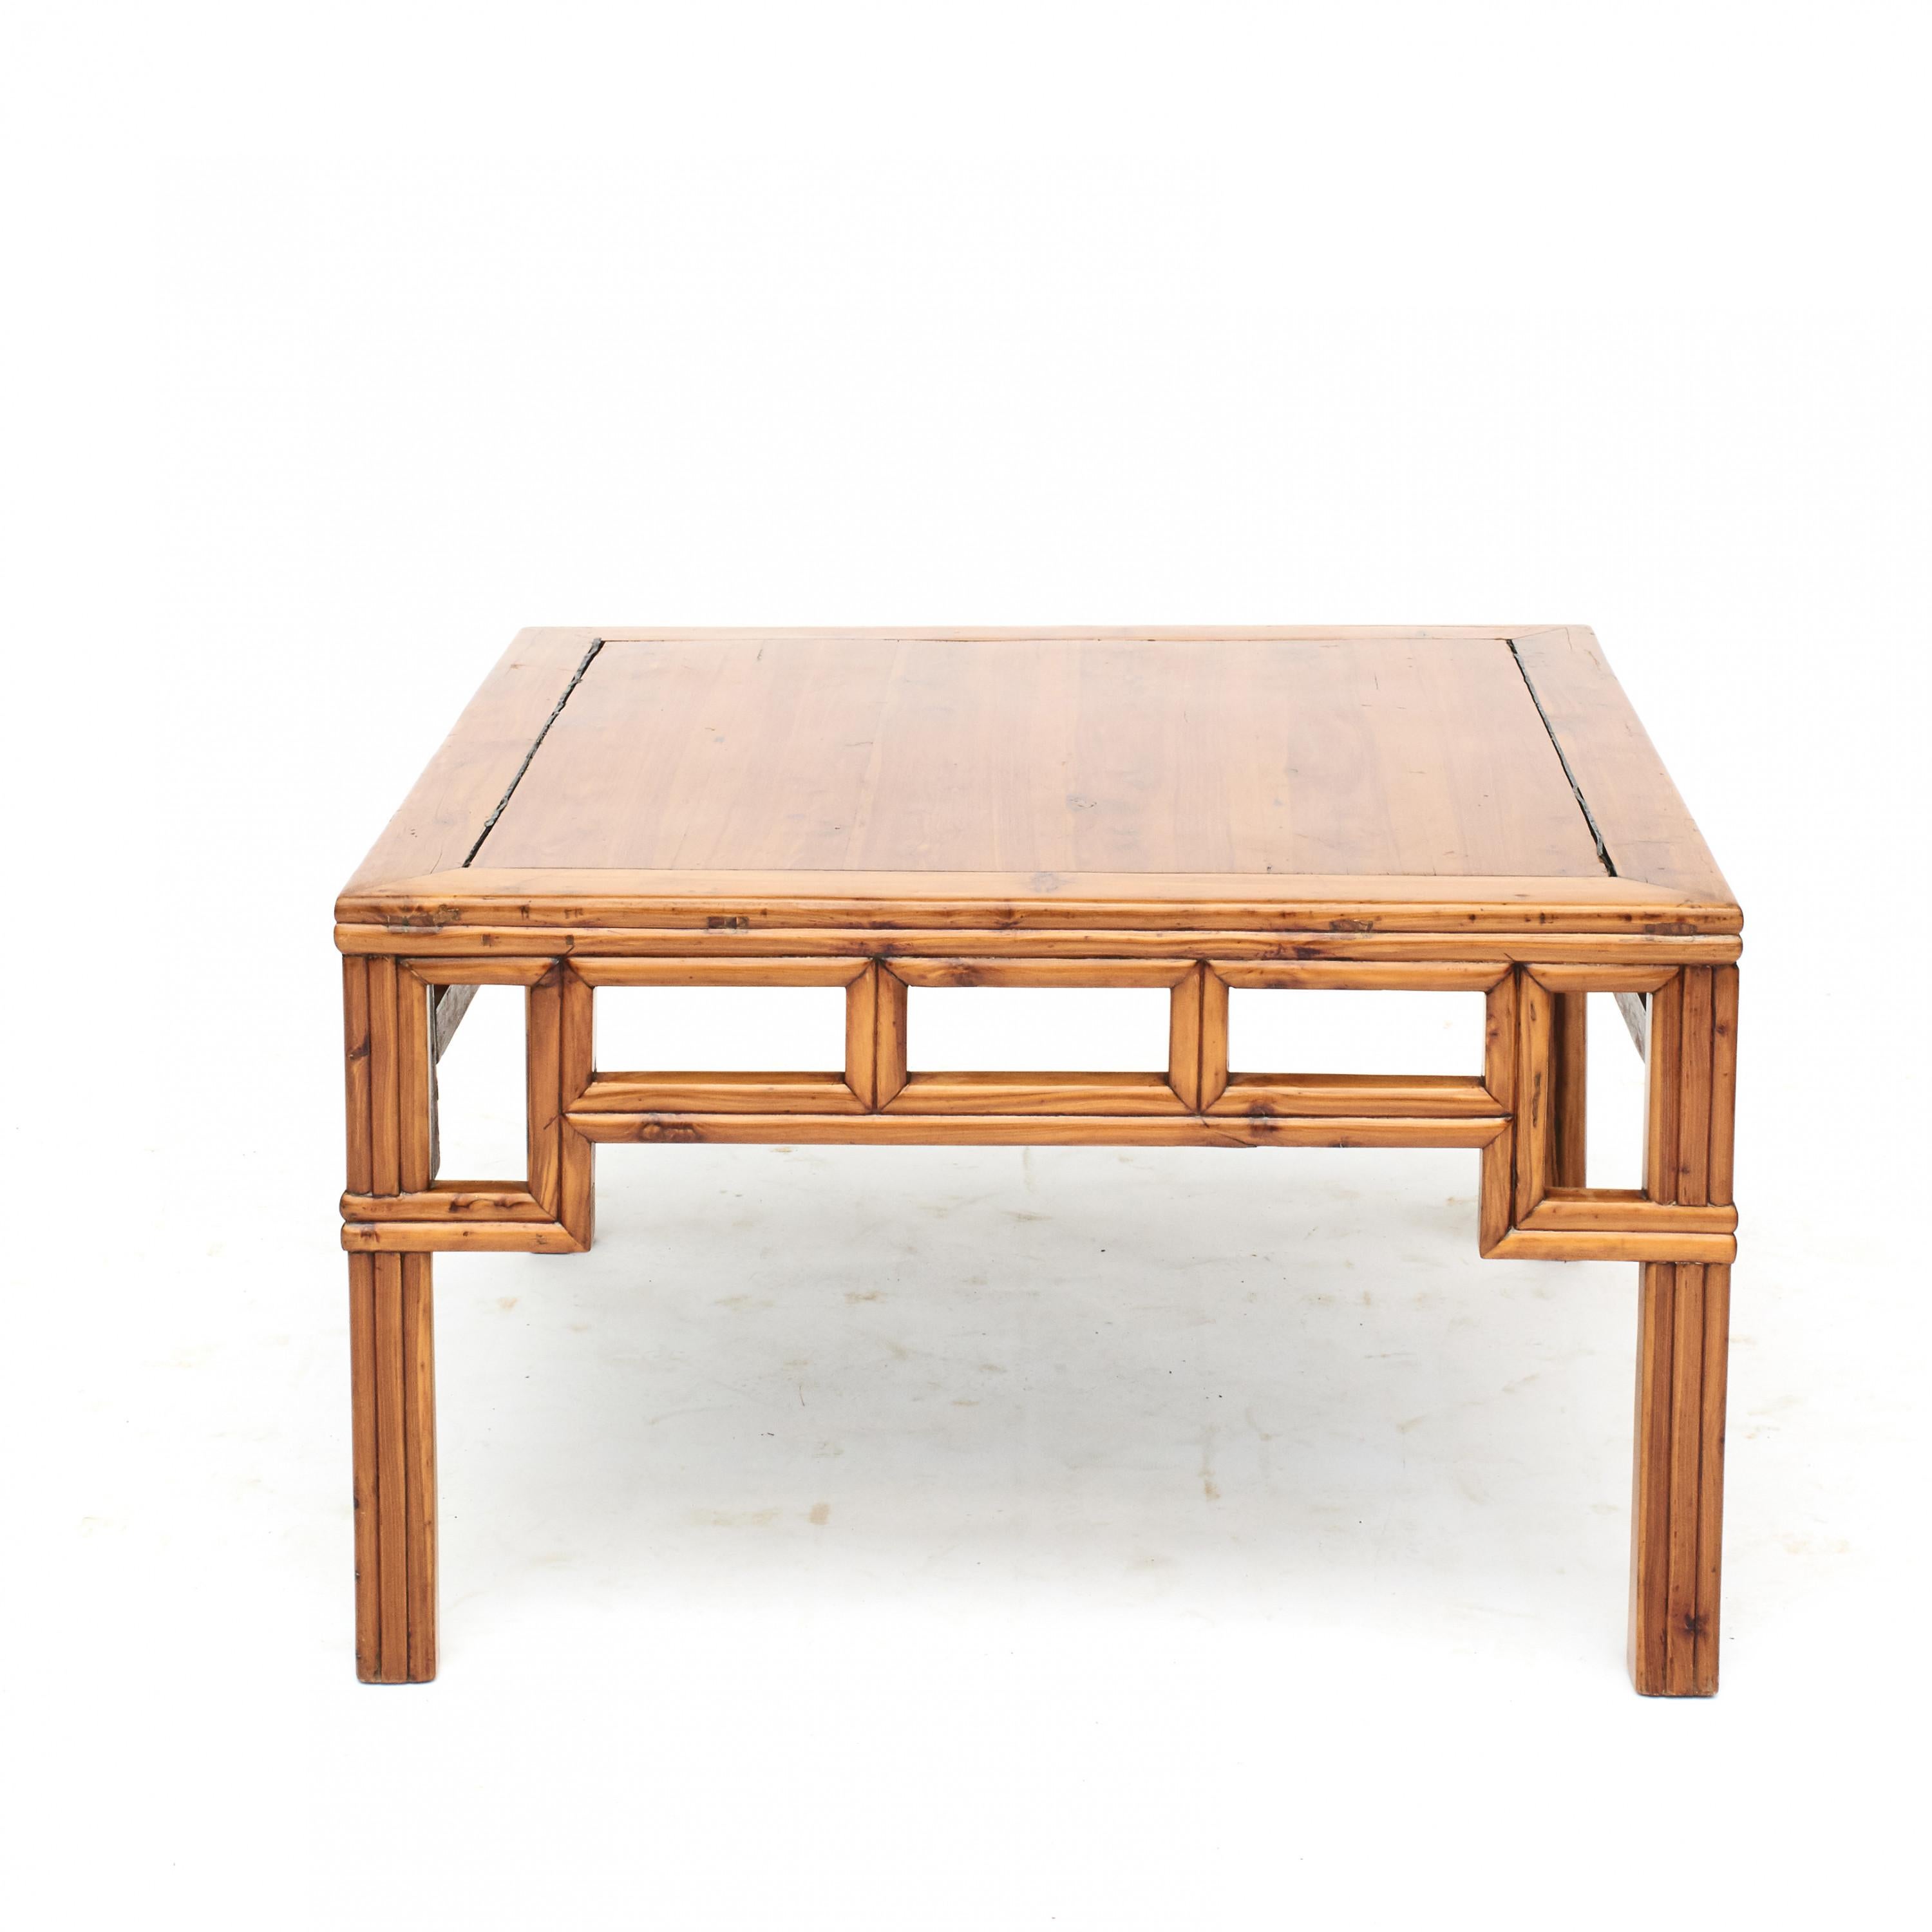 Beautiful saffron colored coffee table made of peach wood with beautiful grain.
From Jiangsu Province 1850-1870.
Furniture's made in peach wood is relatively rare.
 